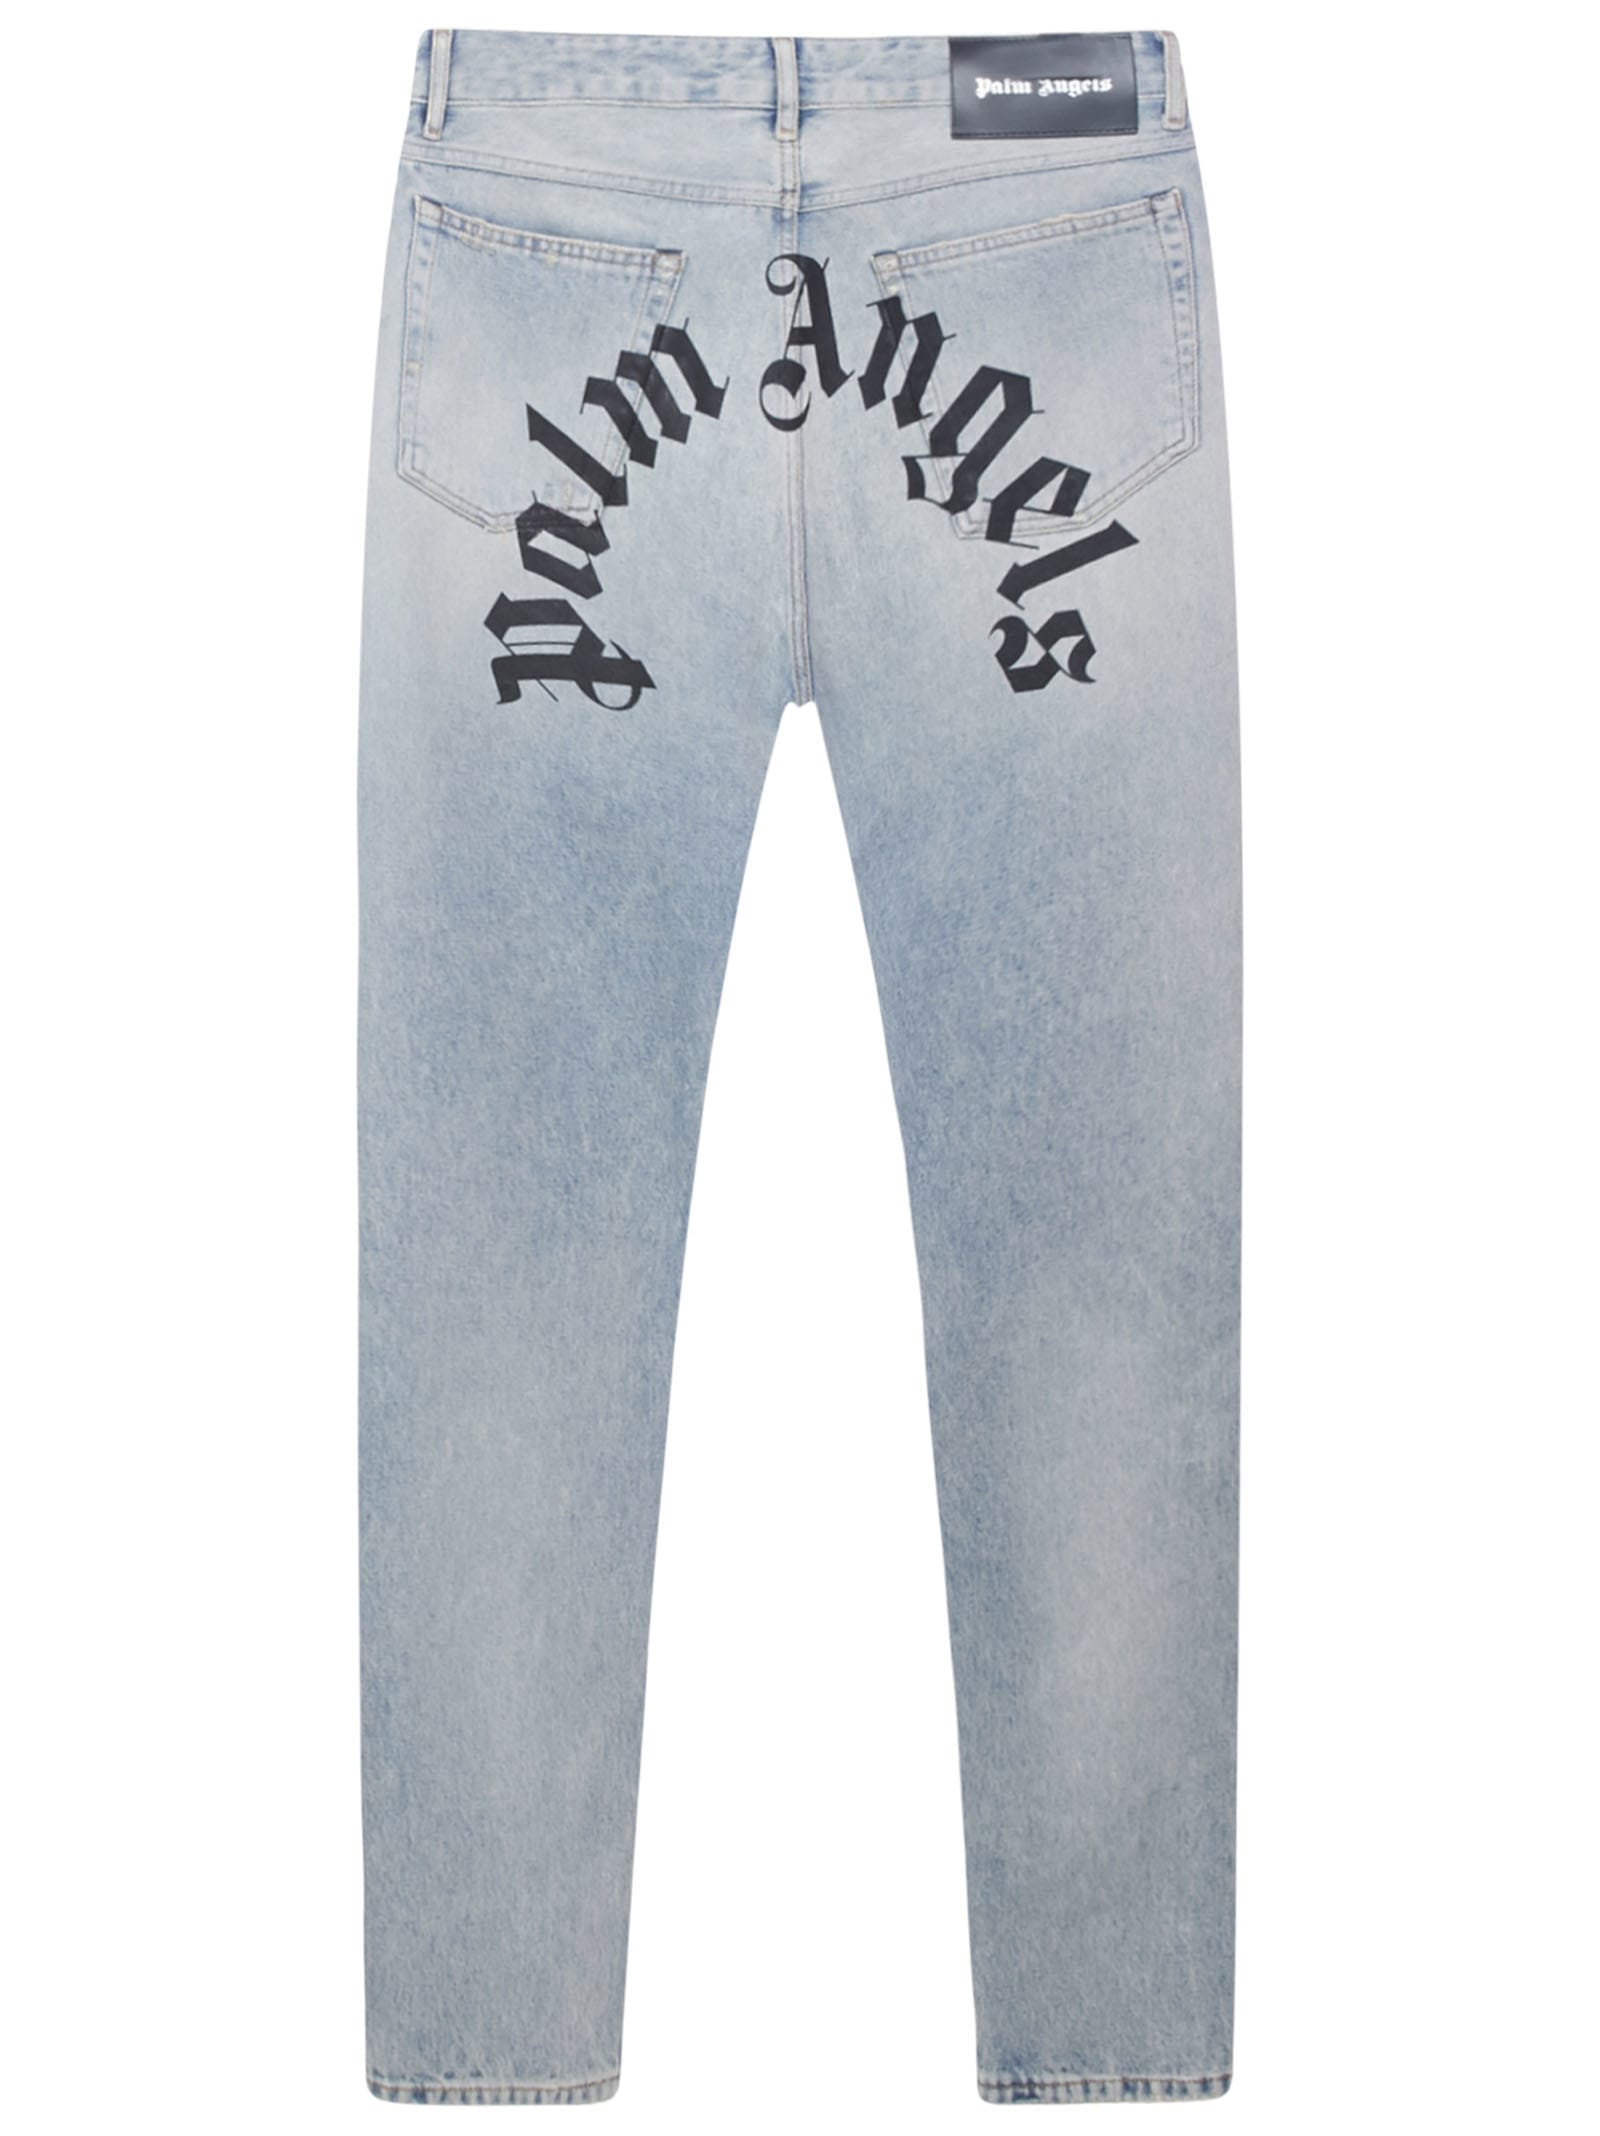 PALM ANGELS JEANS,11245121